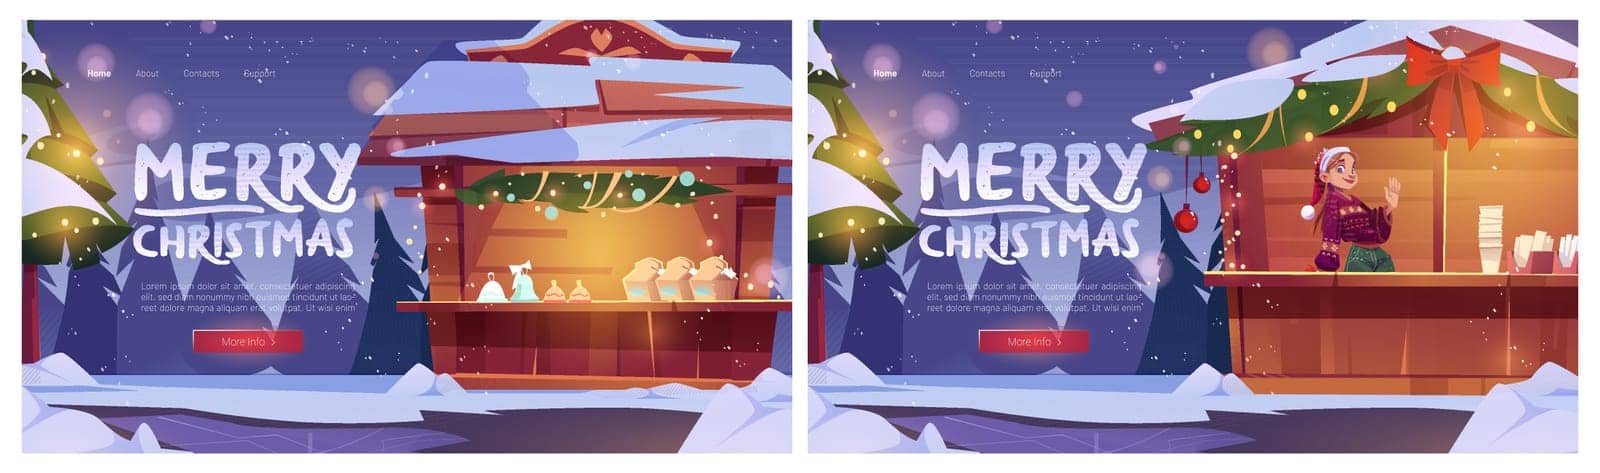 Christmas fair banners with market stalls and snow by upklyak